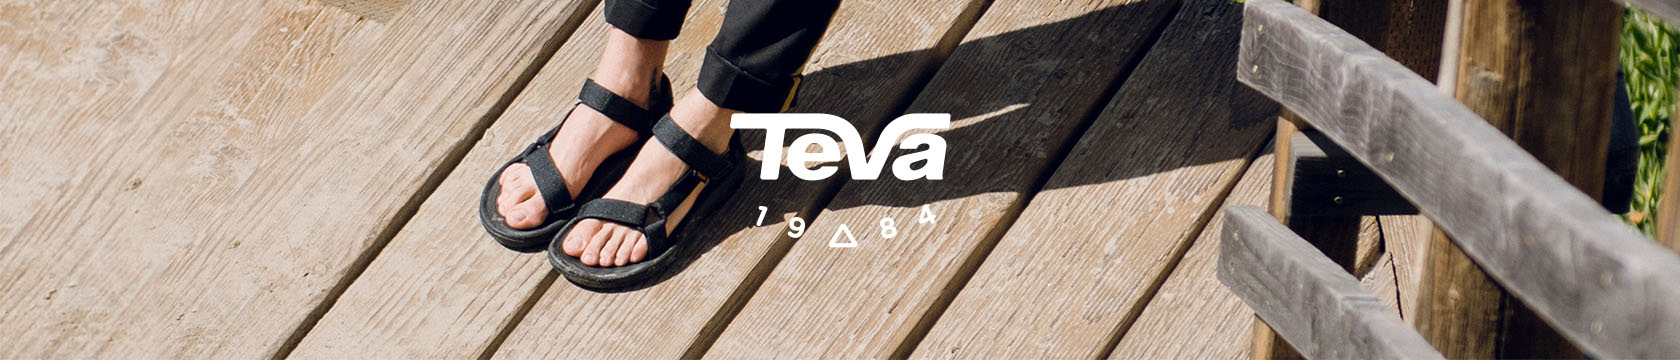 Person's feet standing on wooden stairs wearing Teva sandals.